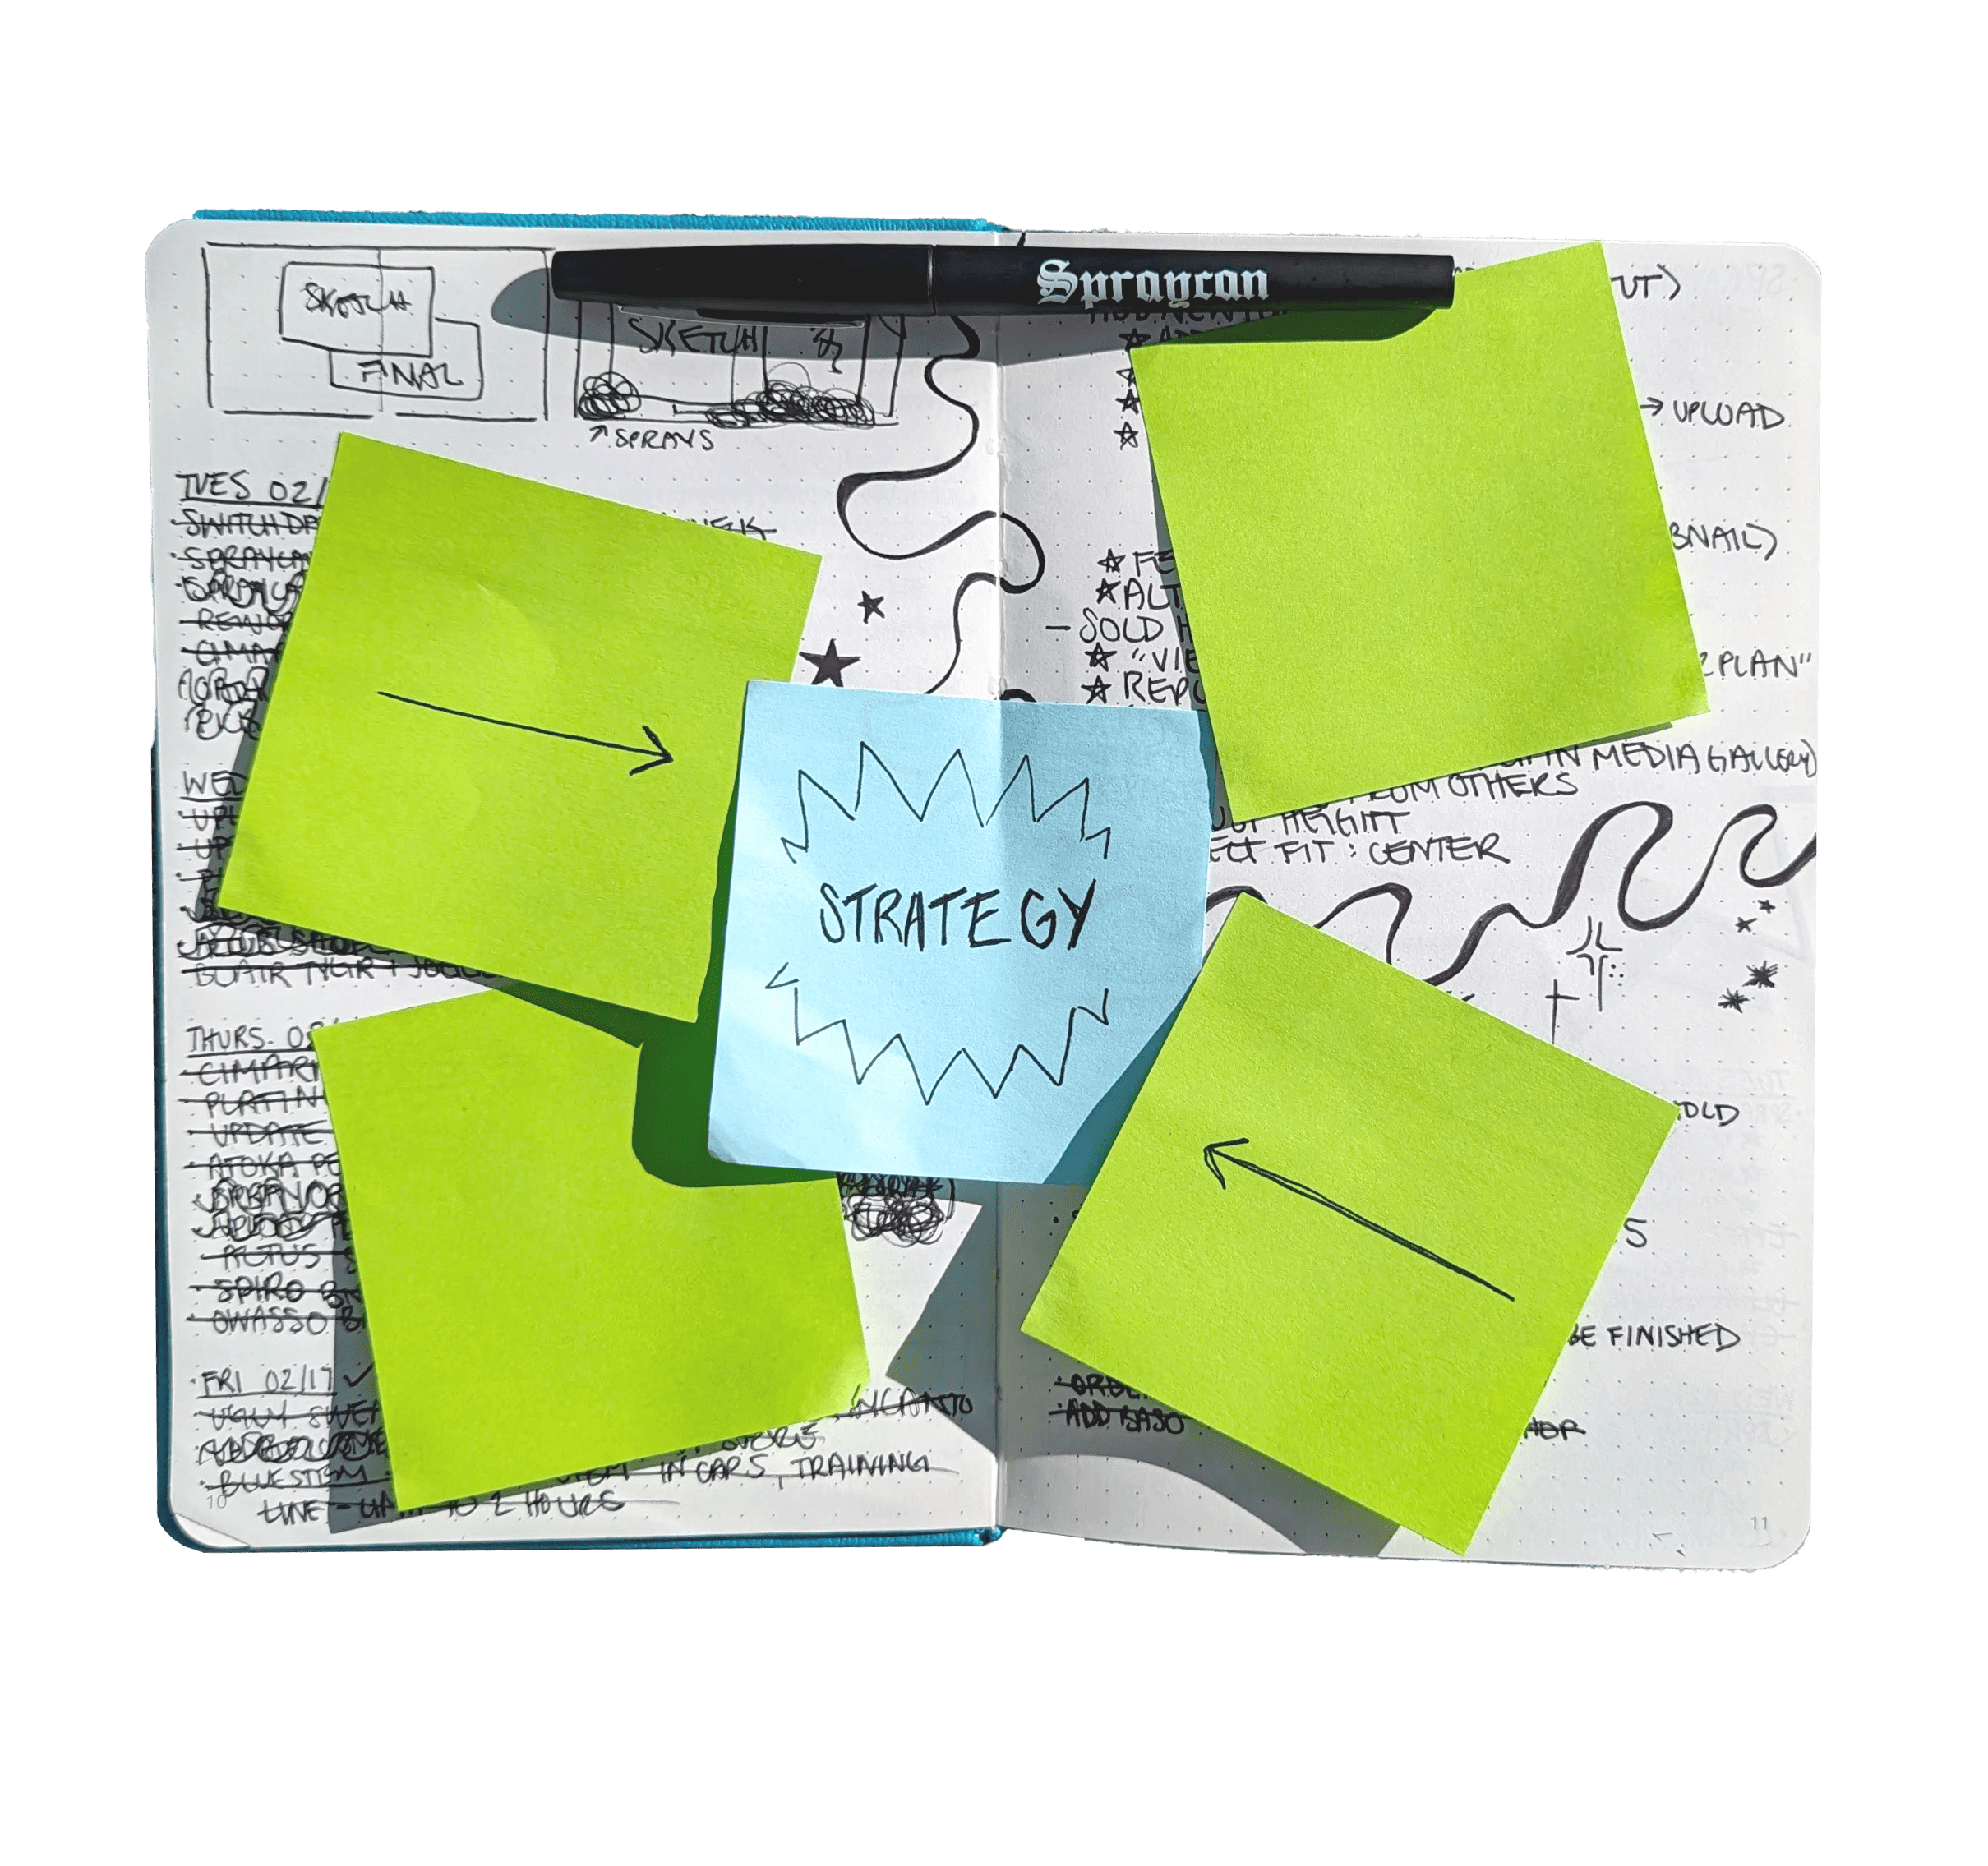 A sketchbook laid open flat with various notes written on it, covered in post-it notes, one of which is in the center and reads "strategy." There is a Spraycan branded pen resting at the top of the open pages.